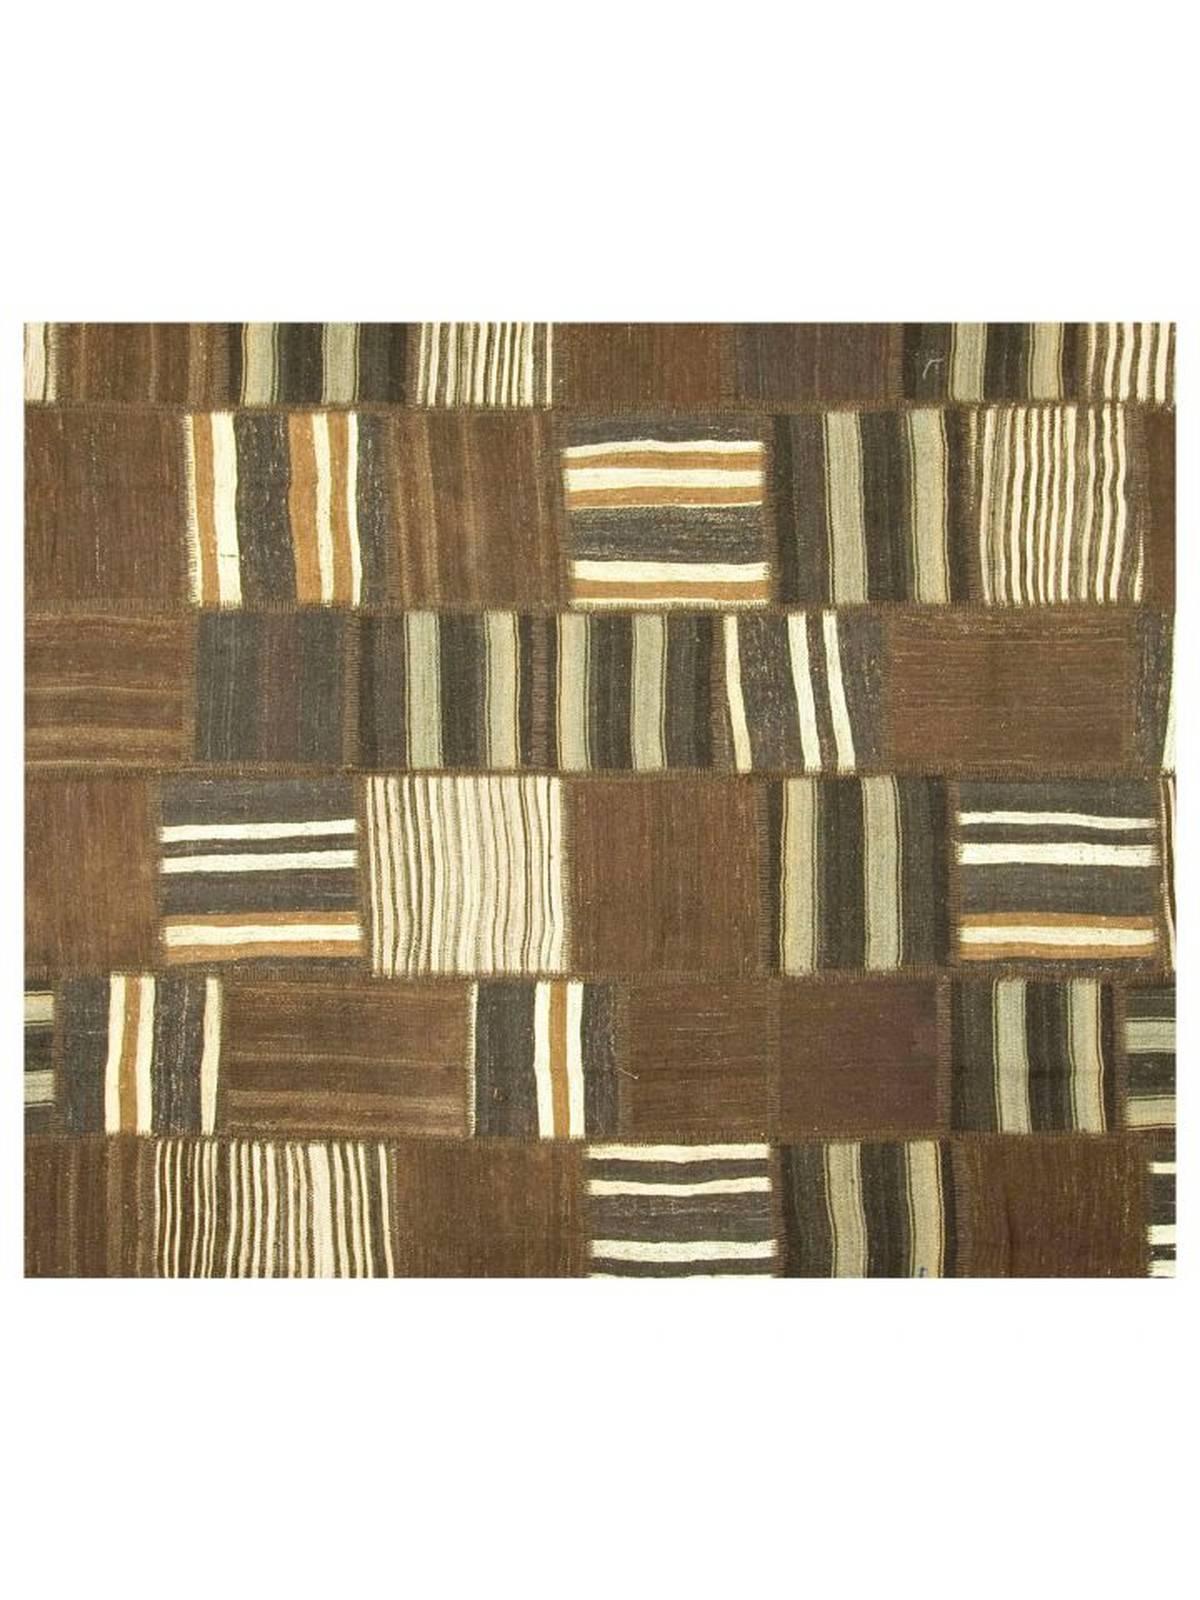 Vintage Turkish handwoven patchwork Kilim in washed out browns and ivory tones. This Kilim is a combination of various handwoven pieces to create a unique, eclectic-looking rug.